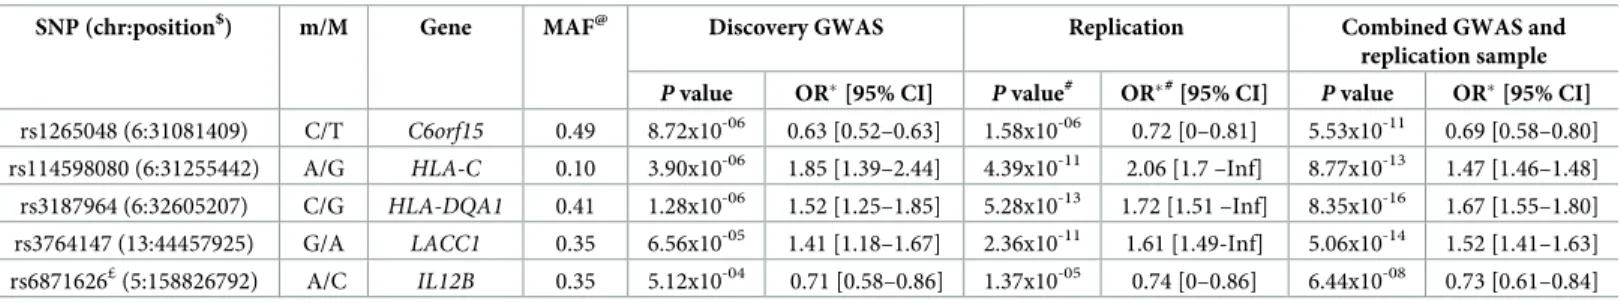 Table 2. Association statistics in the discovery GWAS, the case/control replication and the combined GWAS and replication samples for the five independent SNPs identified by multivariate analysis.